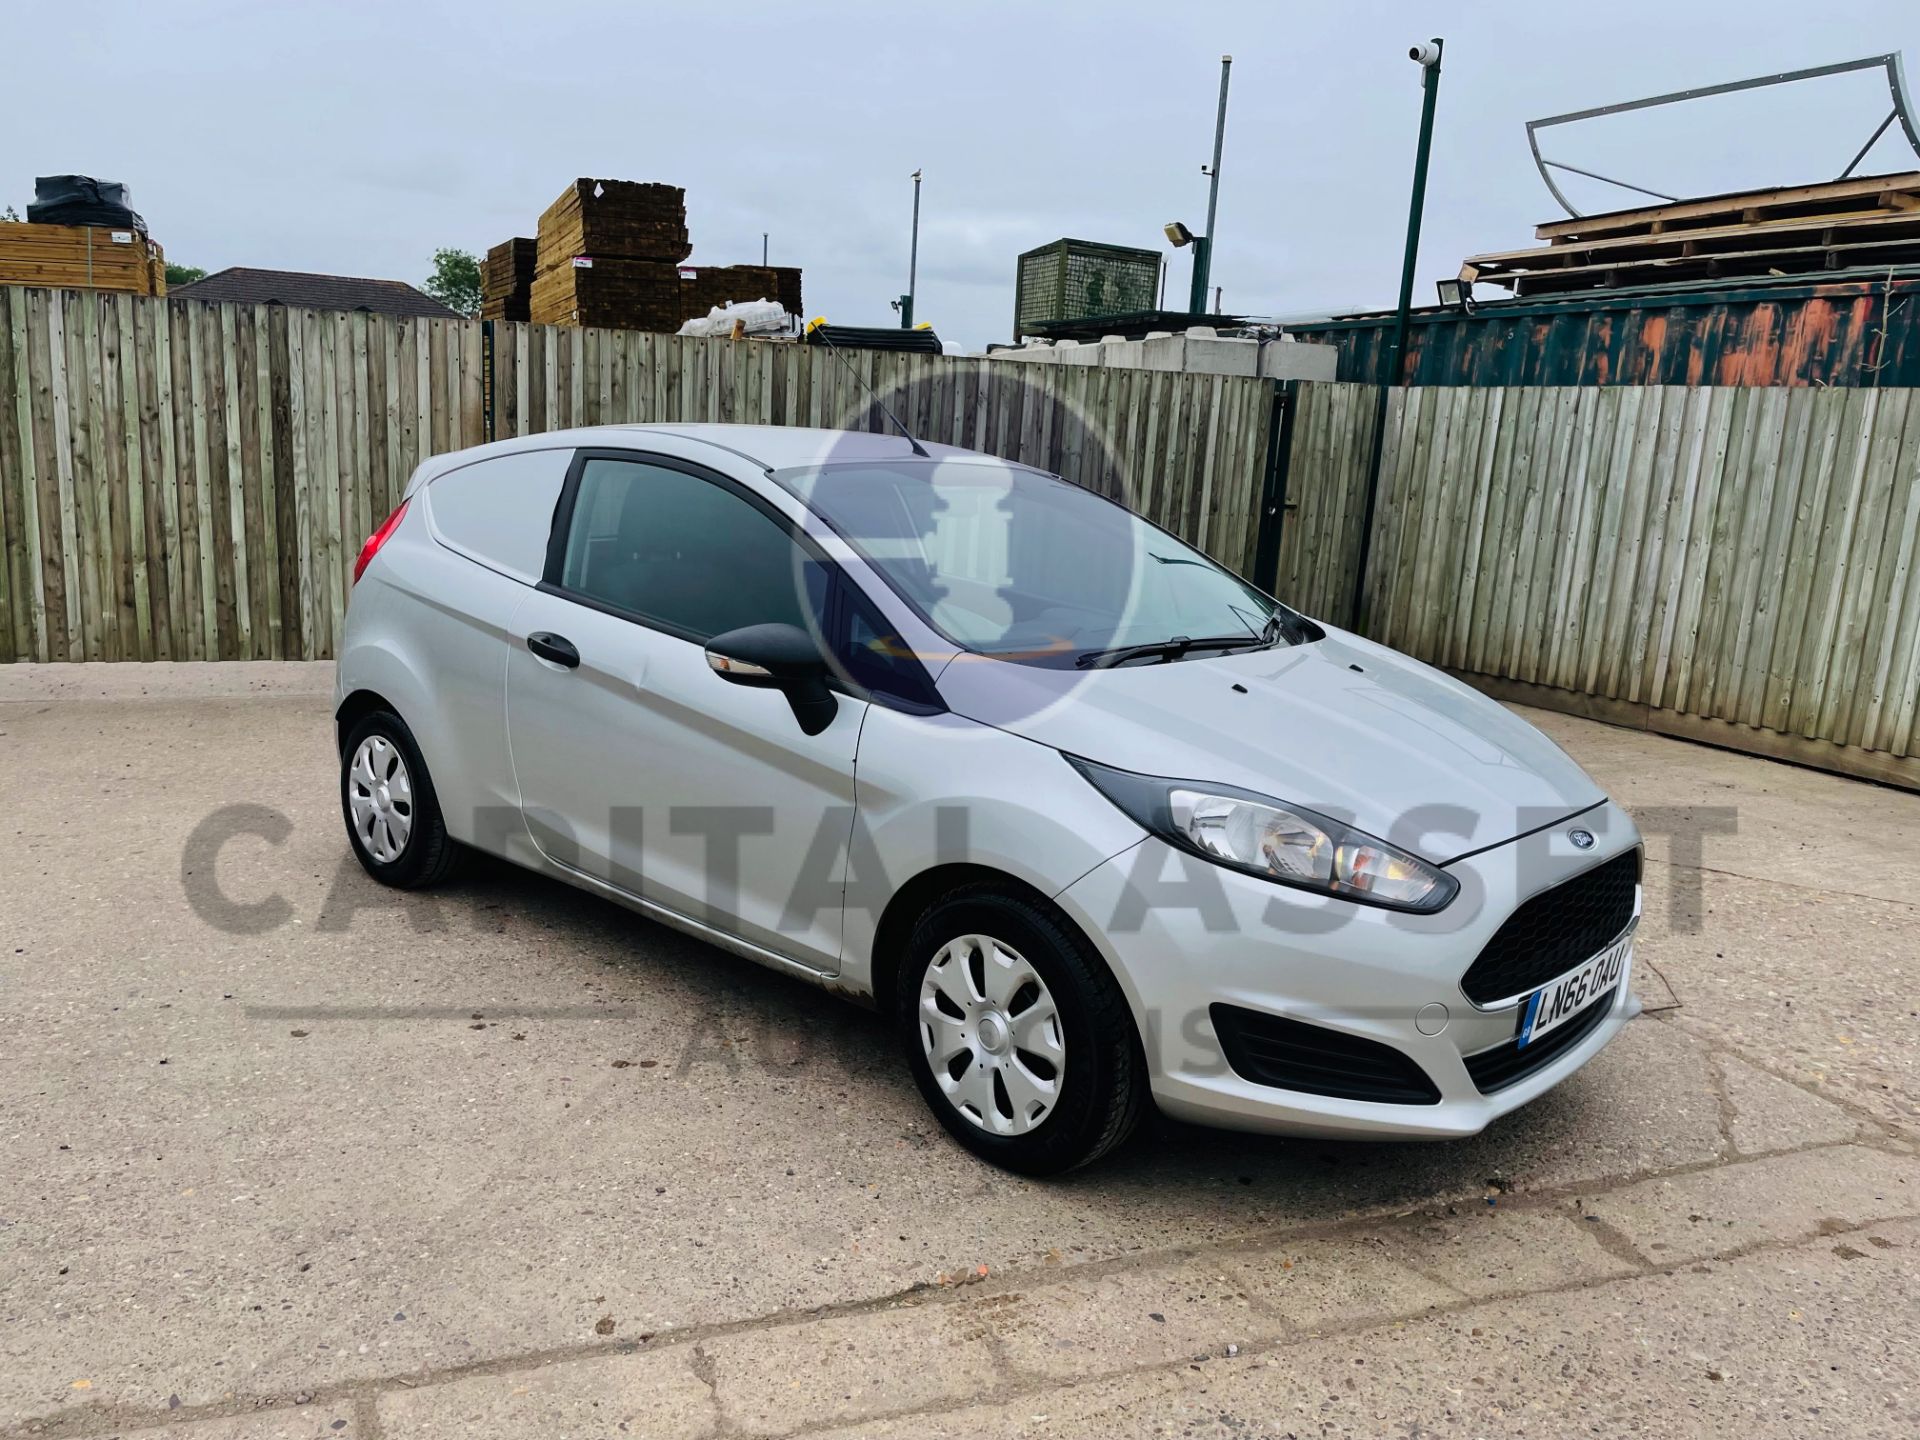 FORD FIESTA *LCV - PANEL VAN* (2017 - EURO 6) 1.5 TDCI - AUTO STOP/START (1 OWNER) *AIR CON* - Image 3 of 38